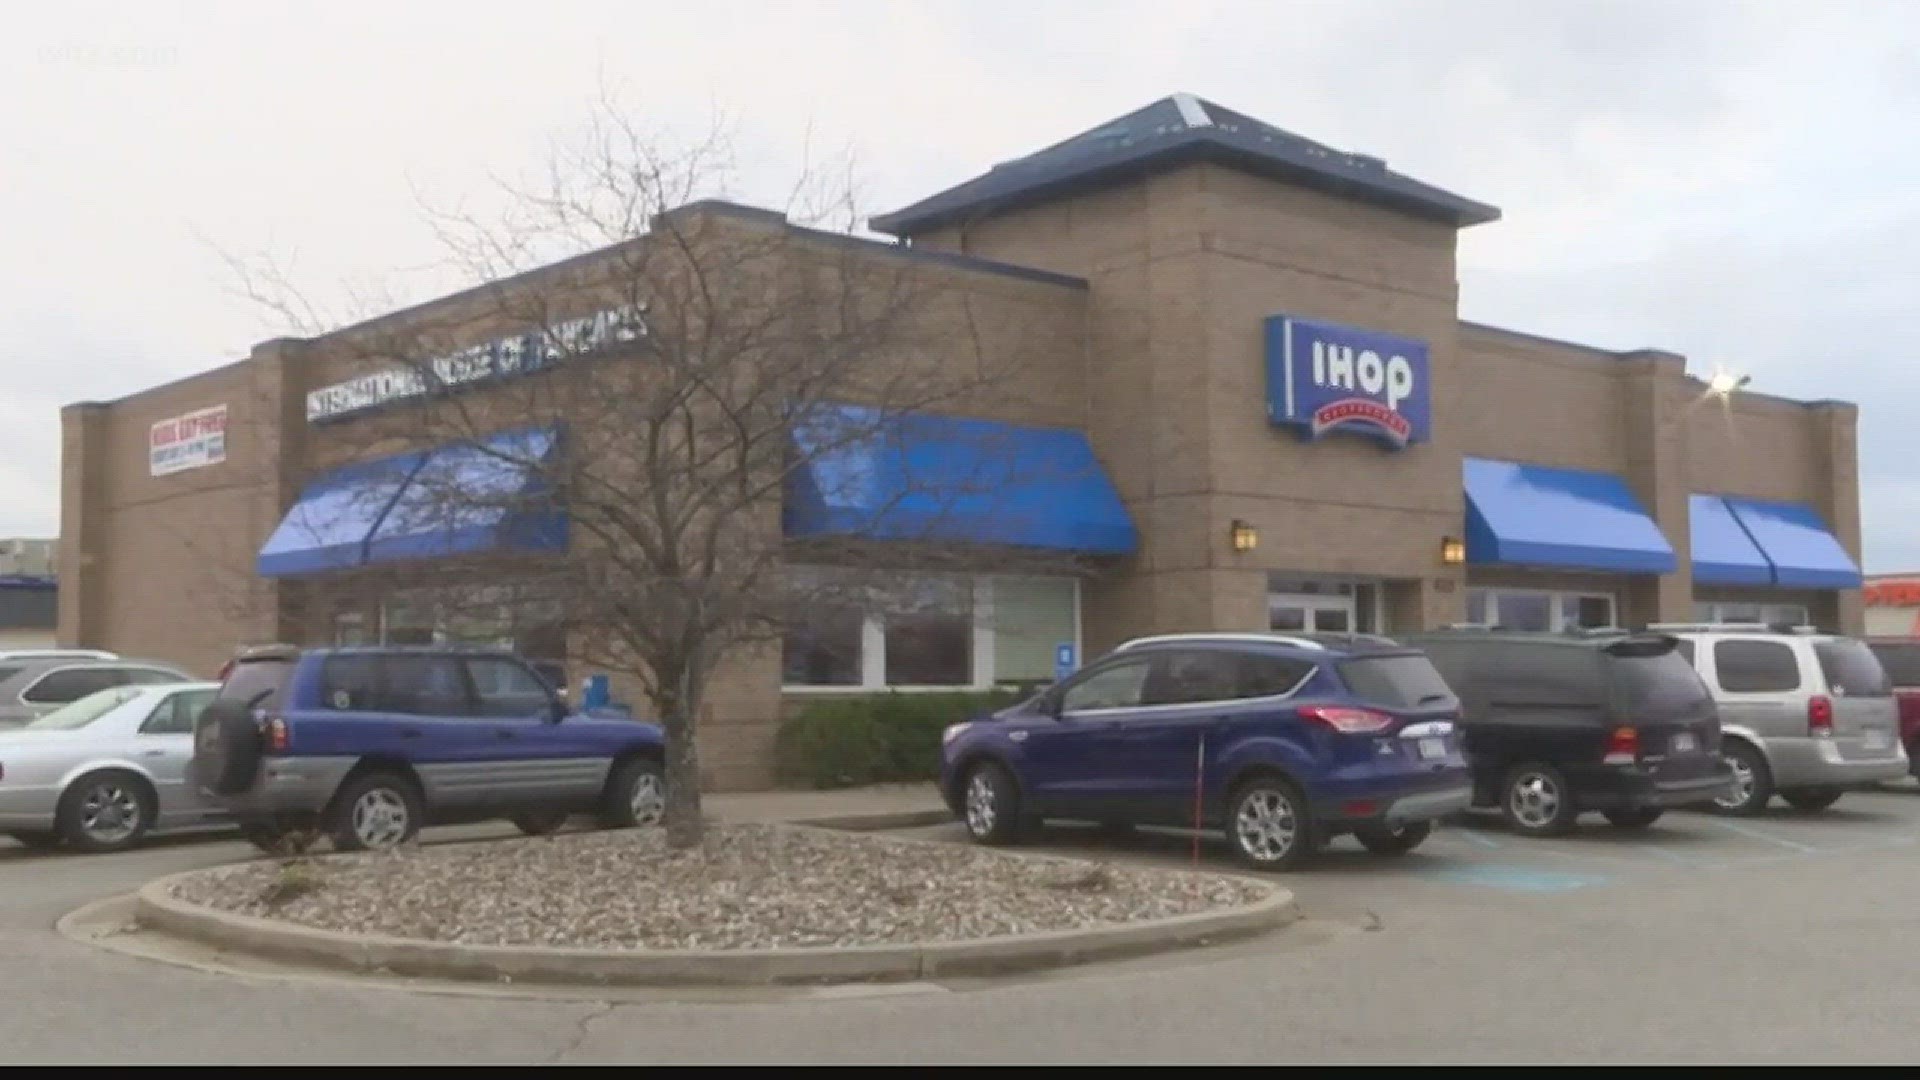 On Monday, the pancake house chain reverted to its long-standing name after a temporary switch to "IHOb" last month, with the "b" standing for burgers.